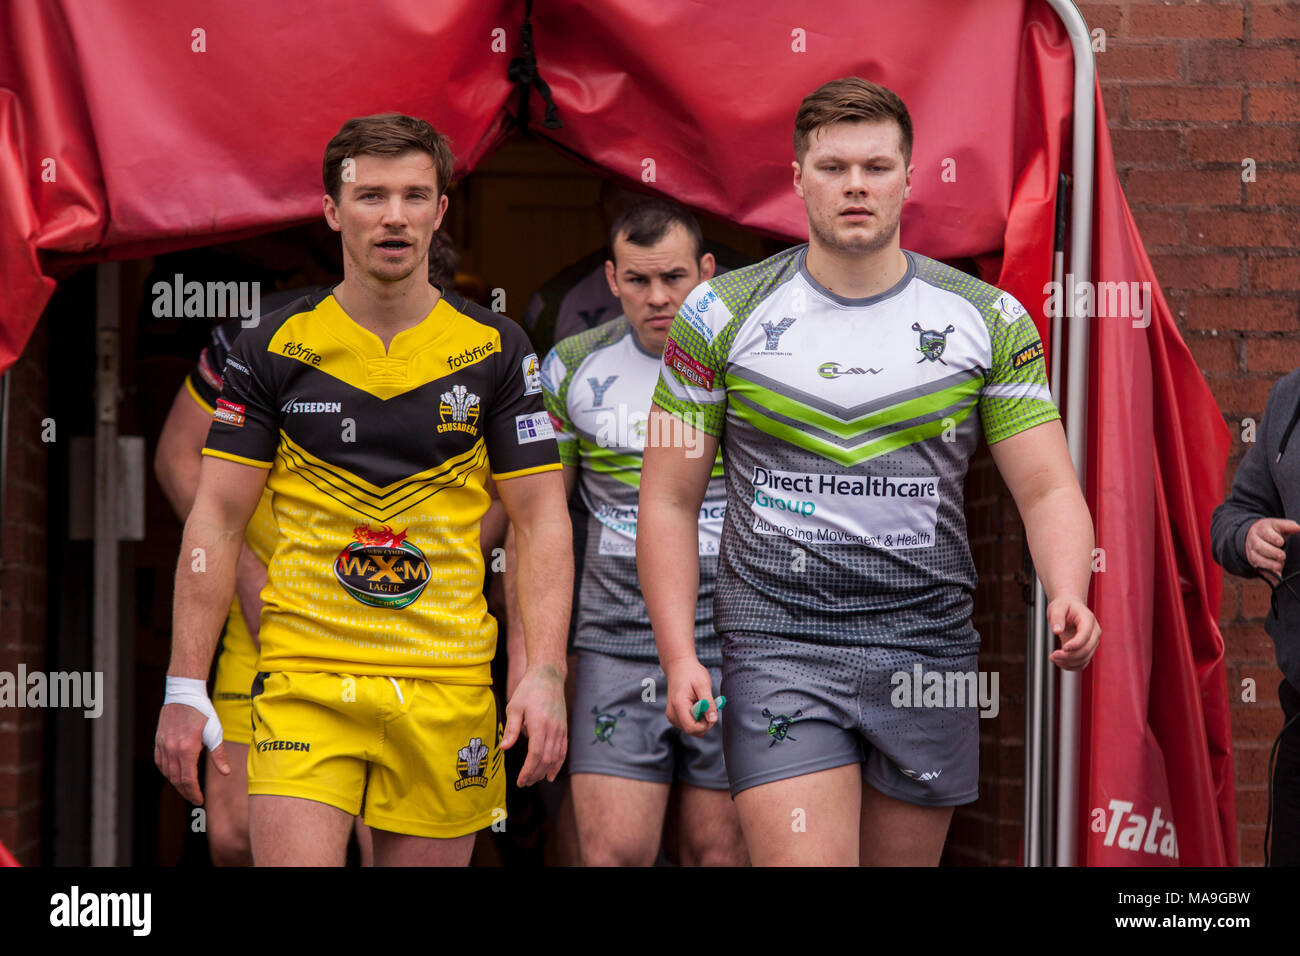 Llanelli, Wales. 29th Mar, 2018. West Wales Raiders face North Wales Crusaders in a Betfred League 1 Good Friday Derby Match at Stebonheath Park. Lewis Mitchell/Alamy Live News. Stock Photo